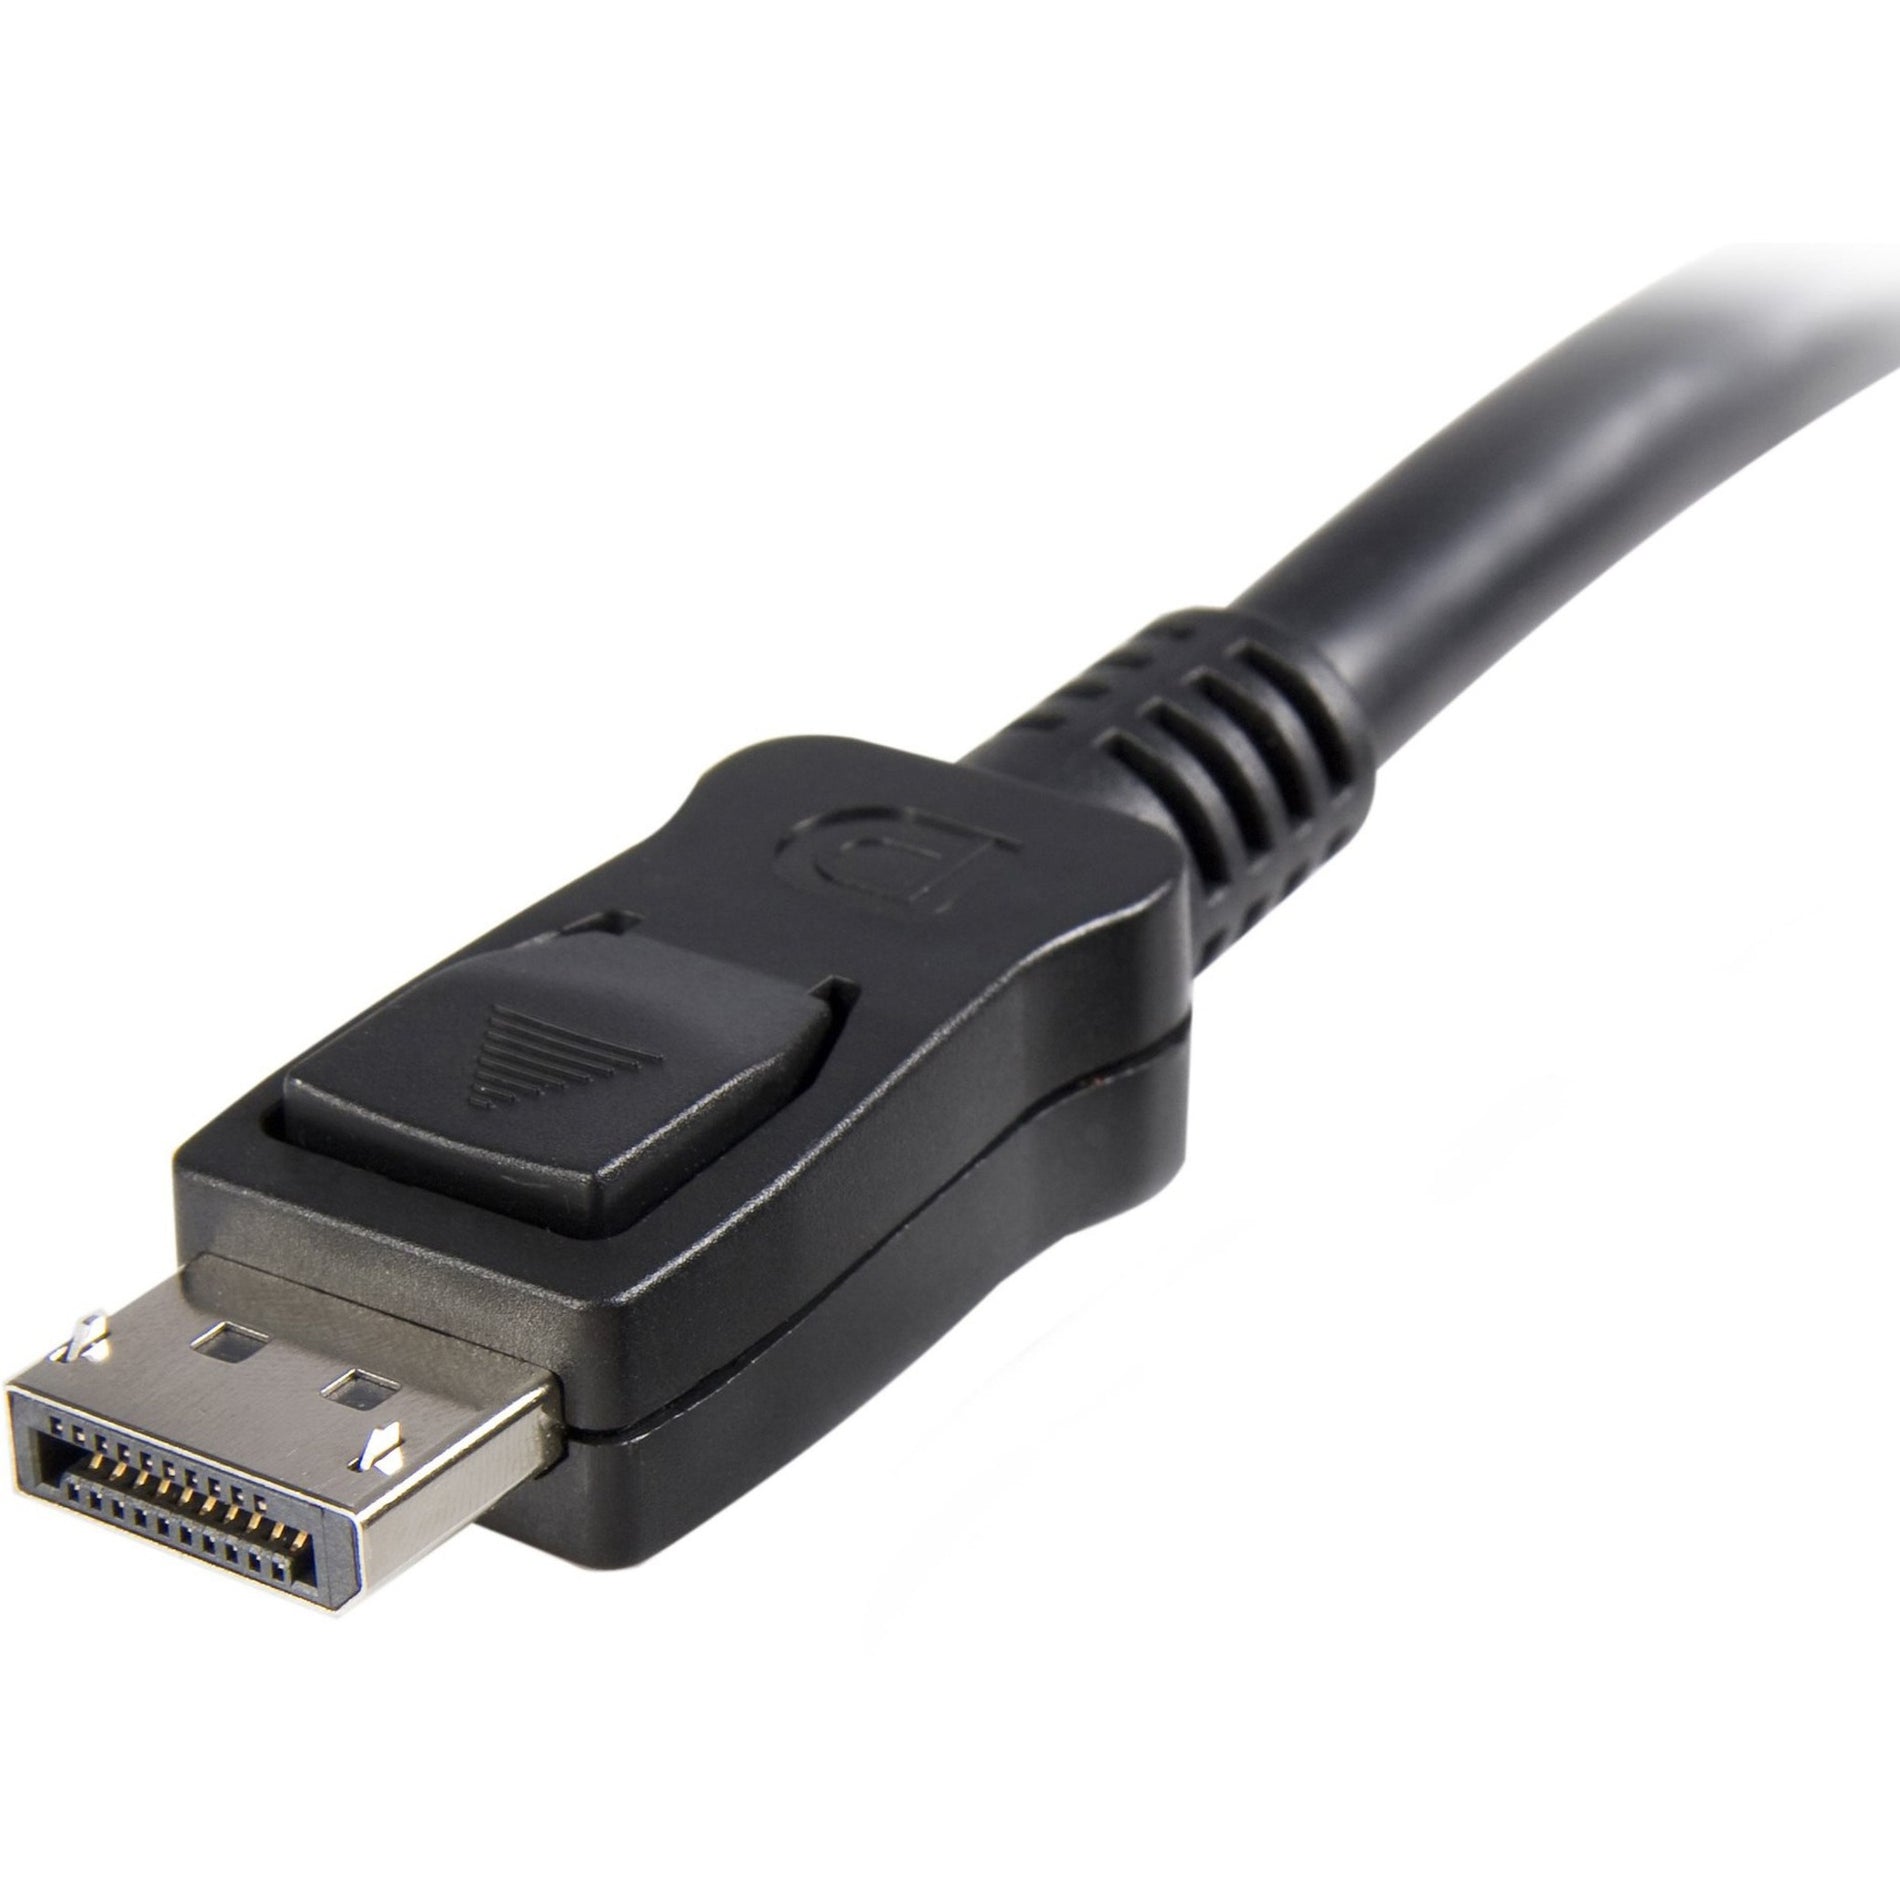 StarTech.com DISPLPORT20L 20 ft DisplayPort Cable with Latches - M/M, High-Speed Video Cable for Notebooks, Monitors, and More